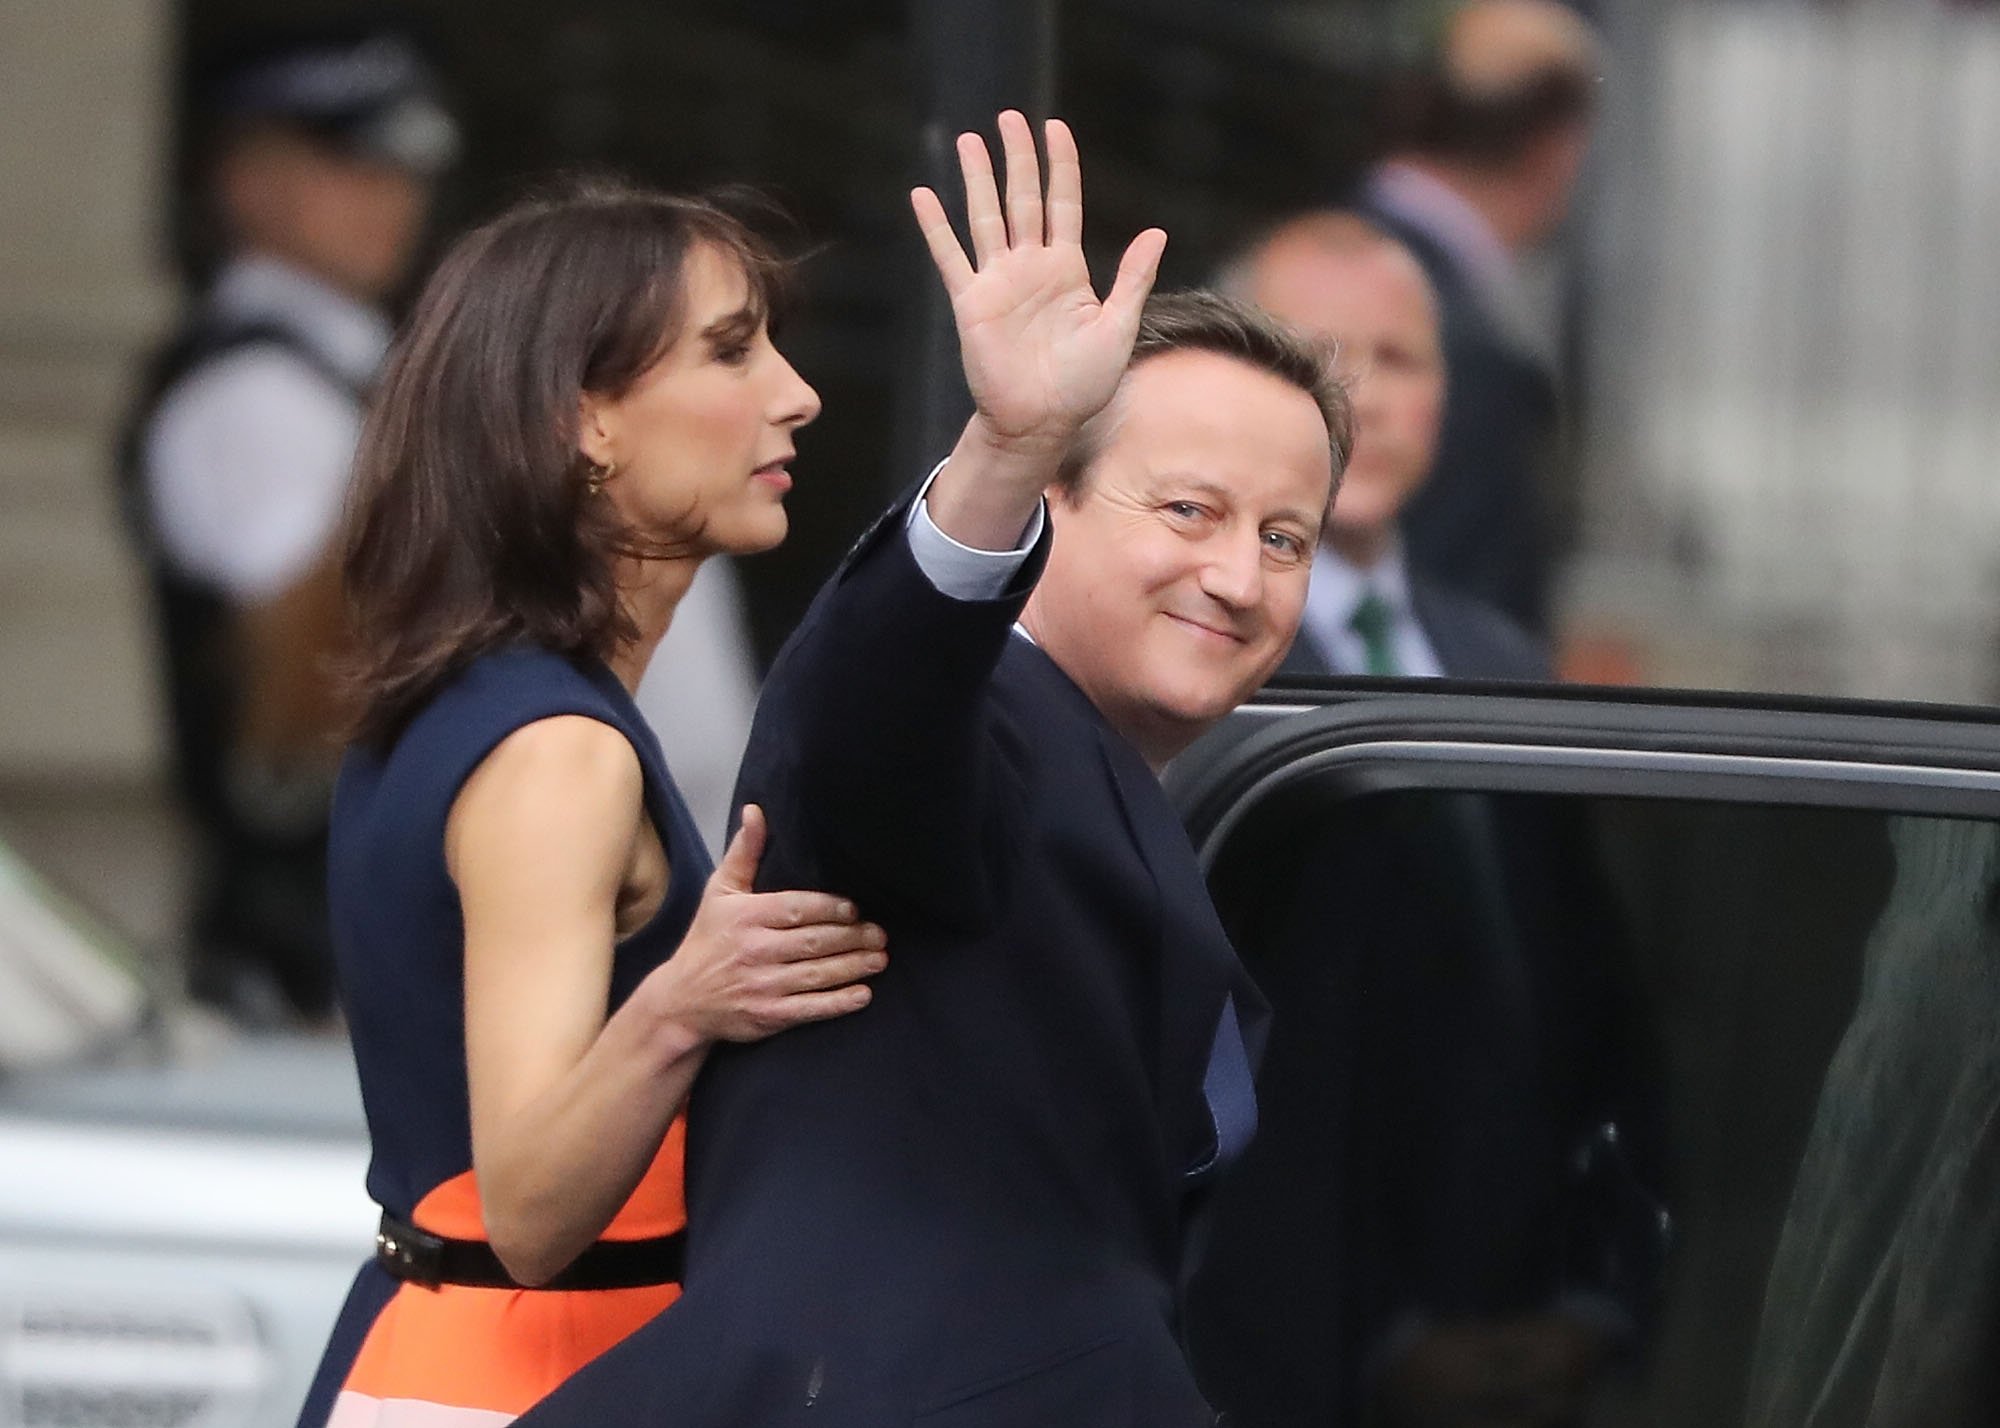 David Cameron with his wife Samantha leave 10 Downing Street for the last time after speaking to the press to visit Buckingham Palace to formally tender his resignation to the Queen, in London, on July 13, 2016. (Christopher Furlong—Getty Images)